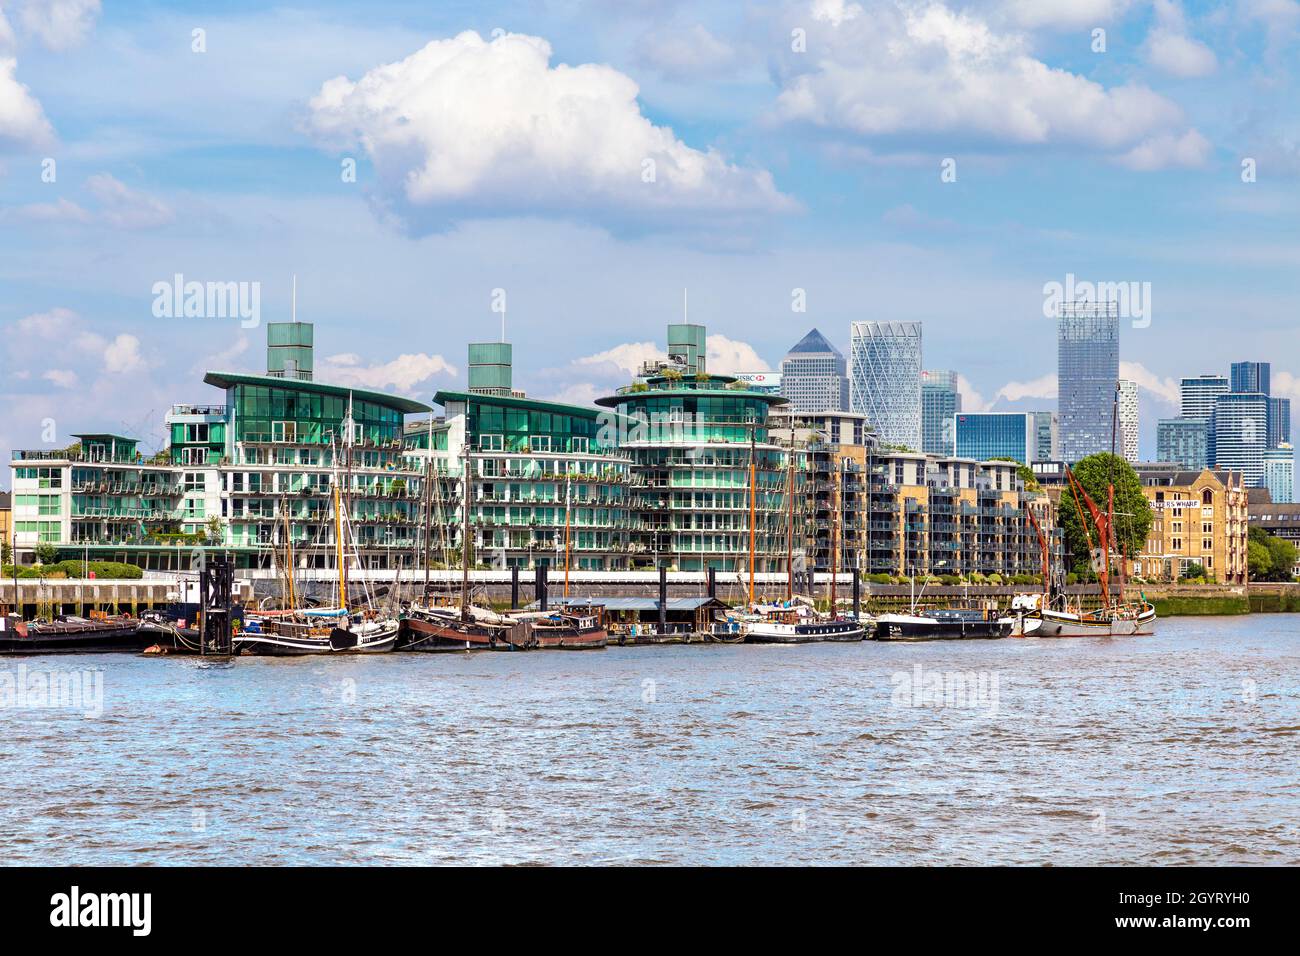 Cinnabar Wharf buildings in Wapping with Canary Wharf in the background as seen from Shad Thames, London, UK Stock Photo